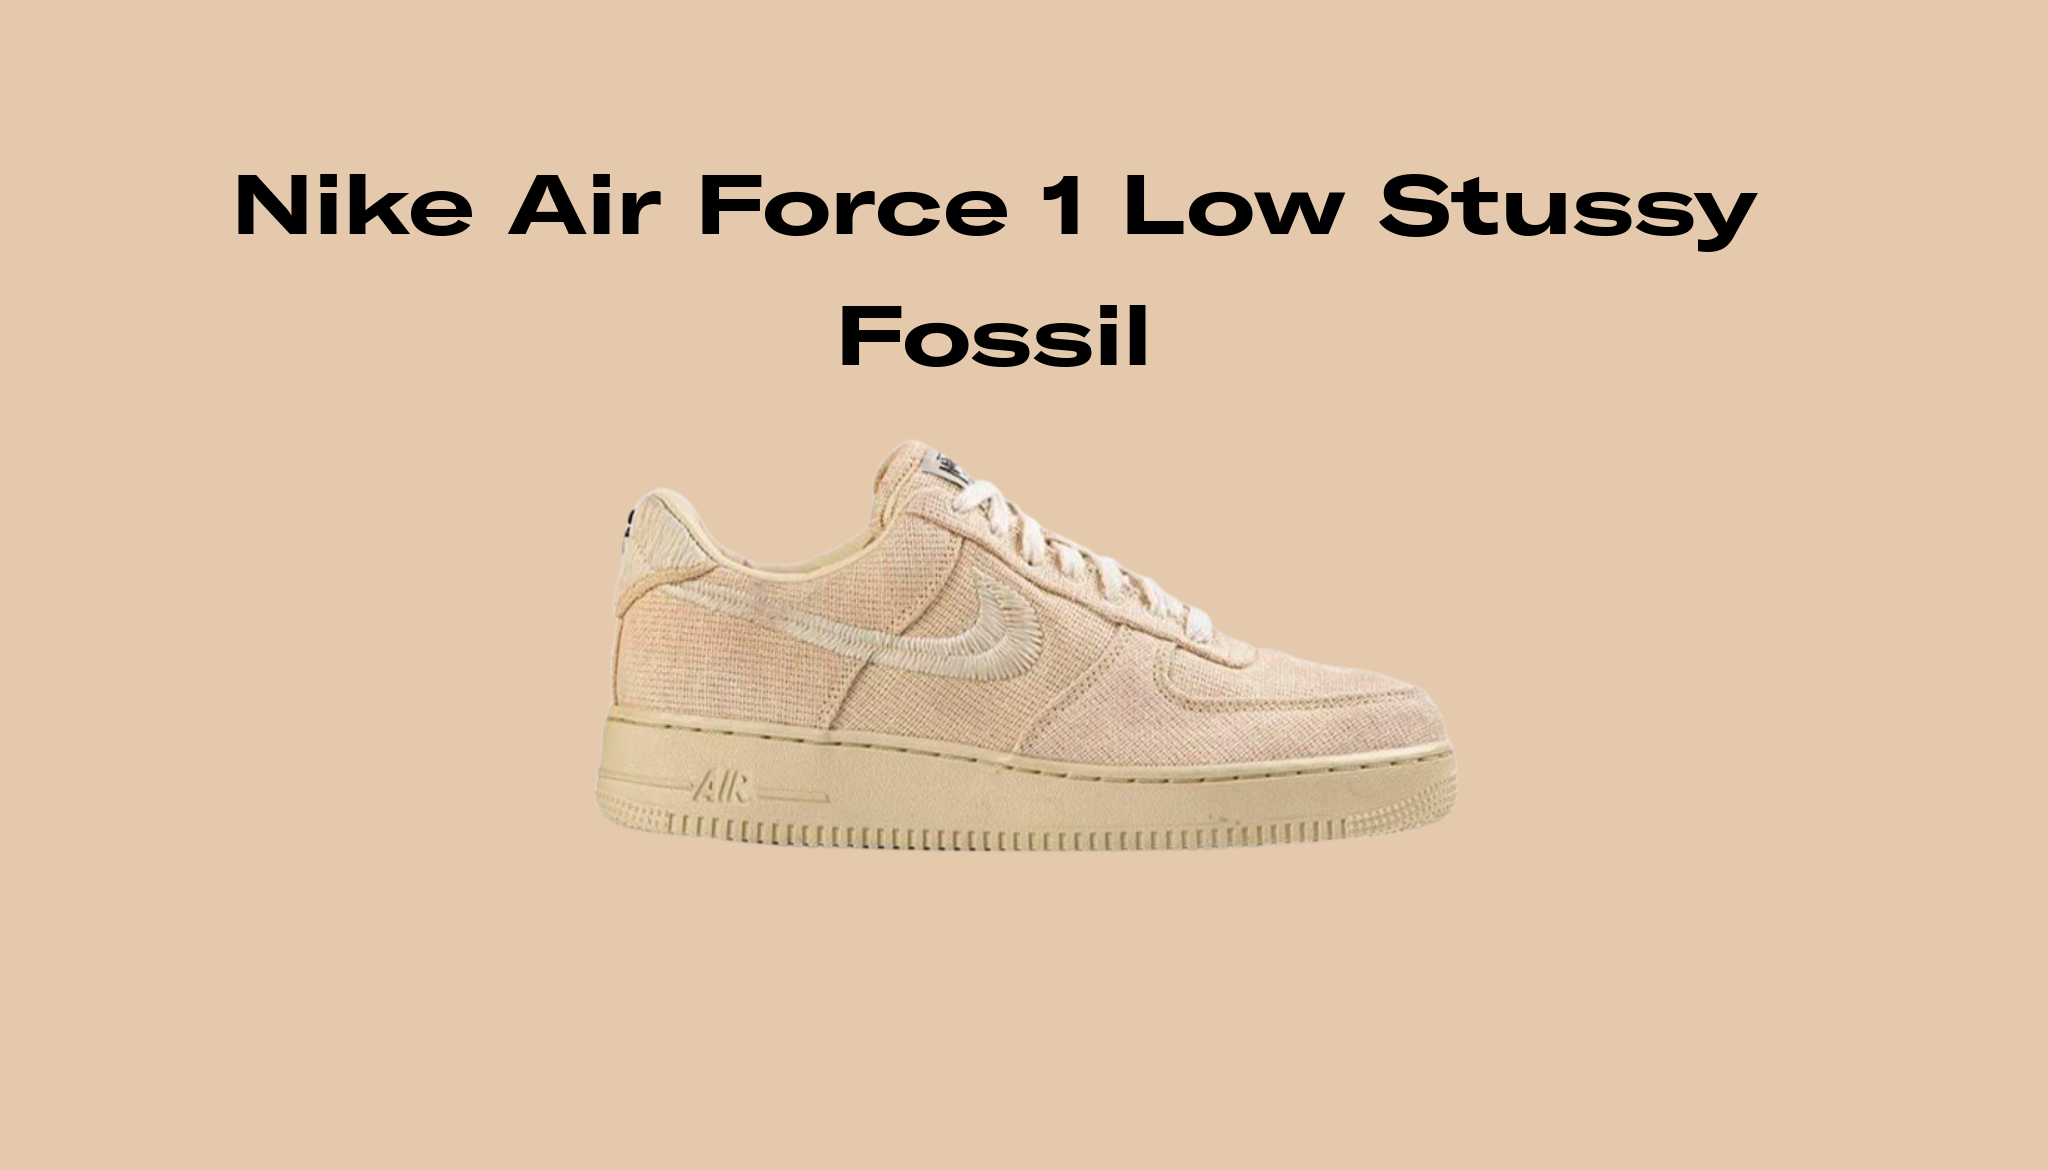 Nike Air Force 1 Low Stussy Fossil, Raffles and Release Date